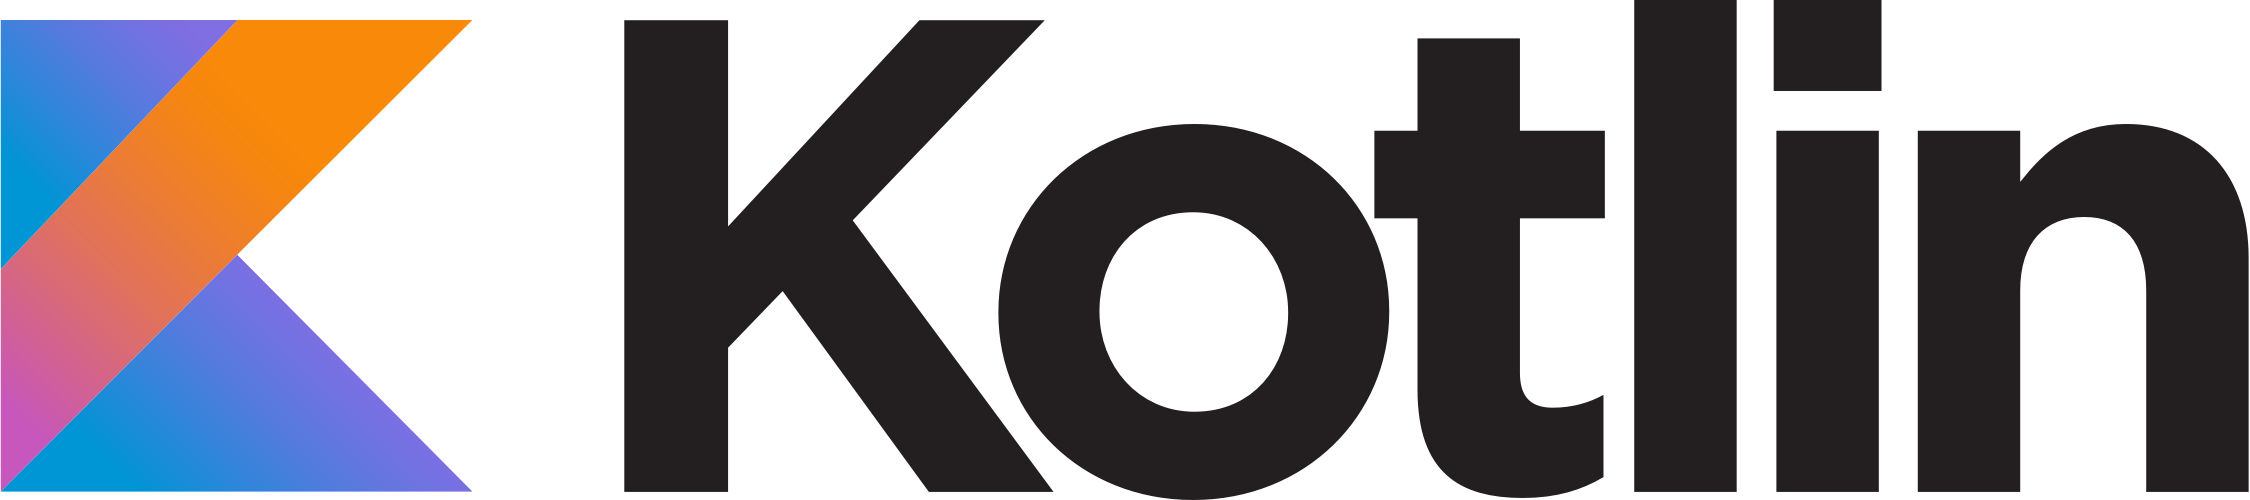 tvxfZWX2S-logo-text.png